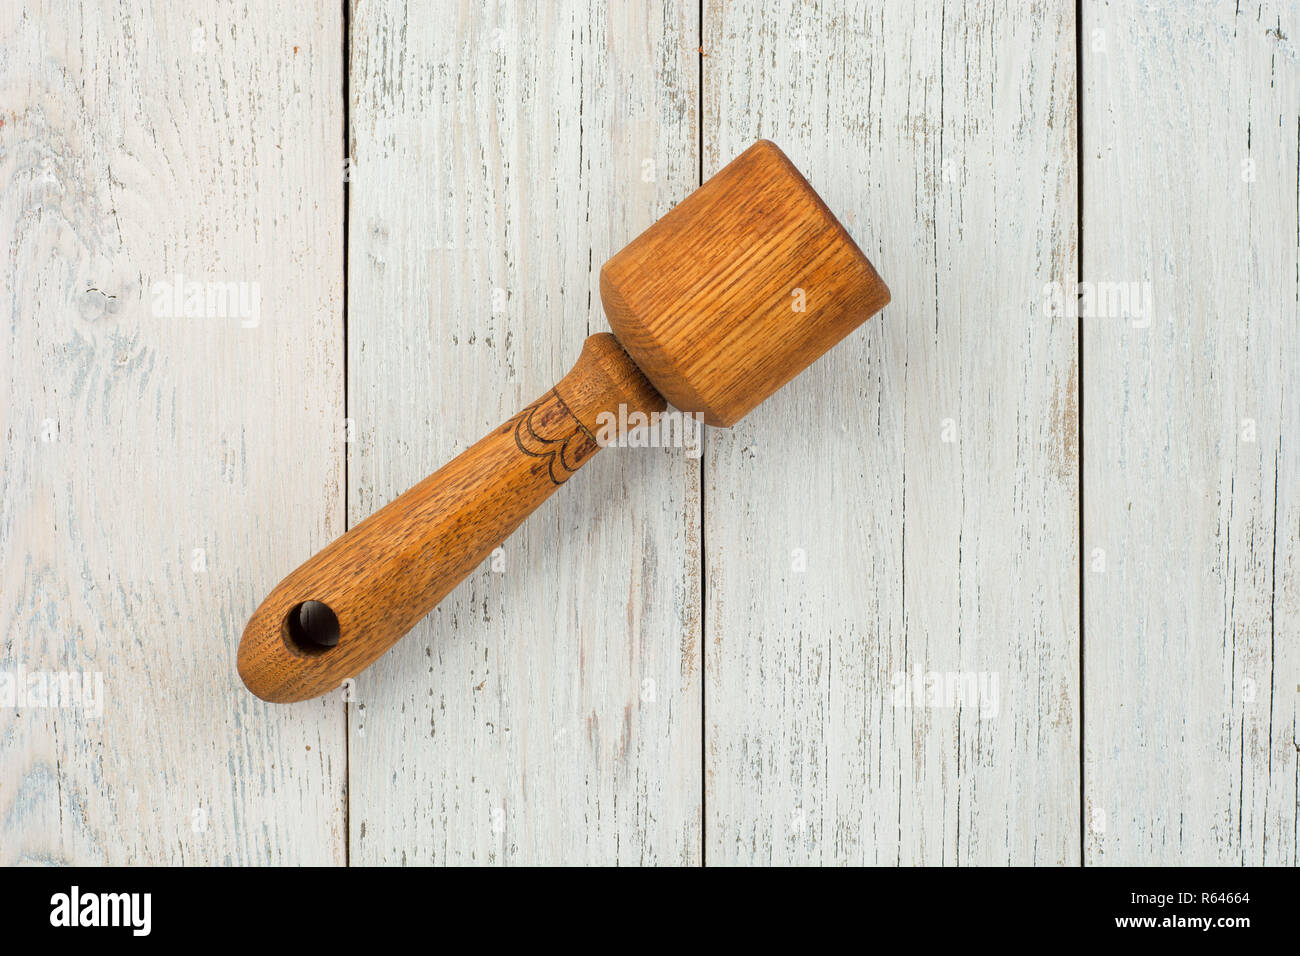 Kitchen tool on wooden background with a blank space for a text, home kitchen decor concept, front view Stock Photo